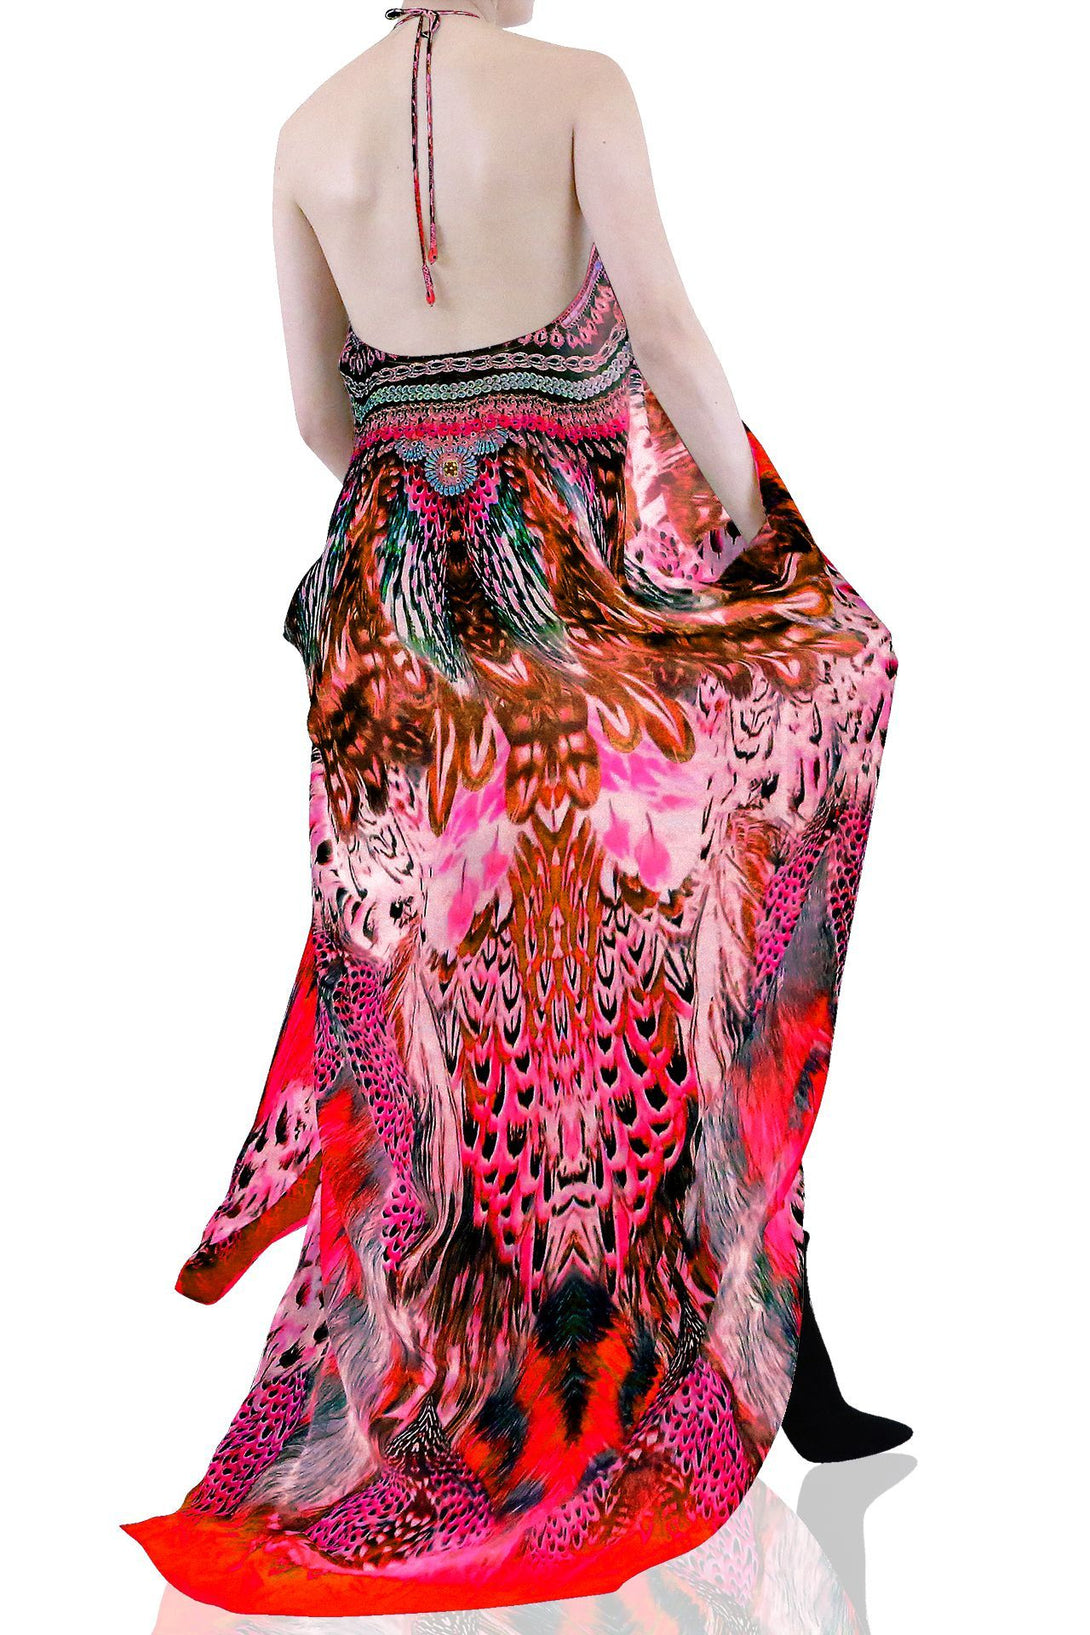 clothes for beach vacation, vacation outfits women, Shahida Parides, kaftan outfit,